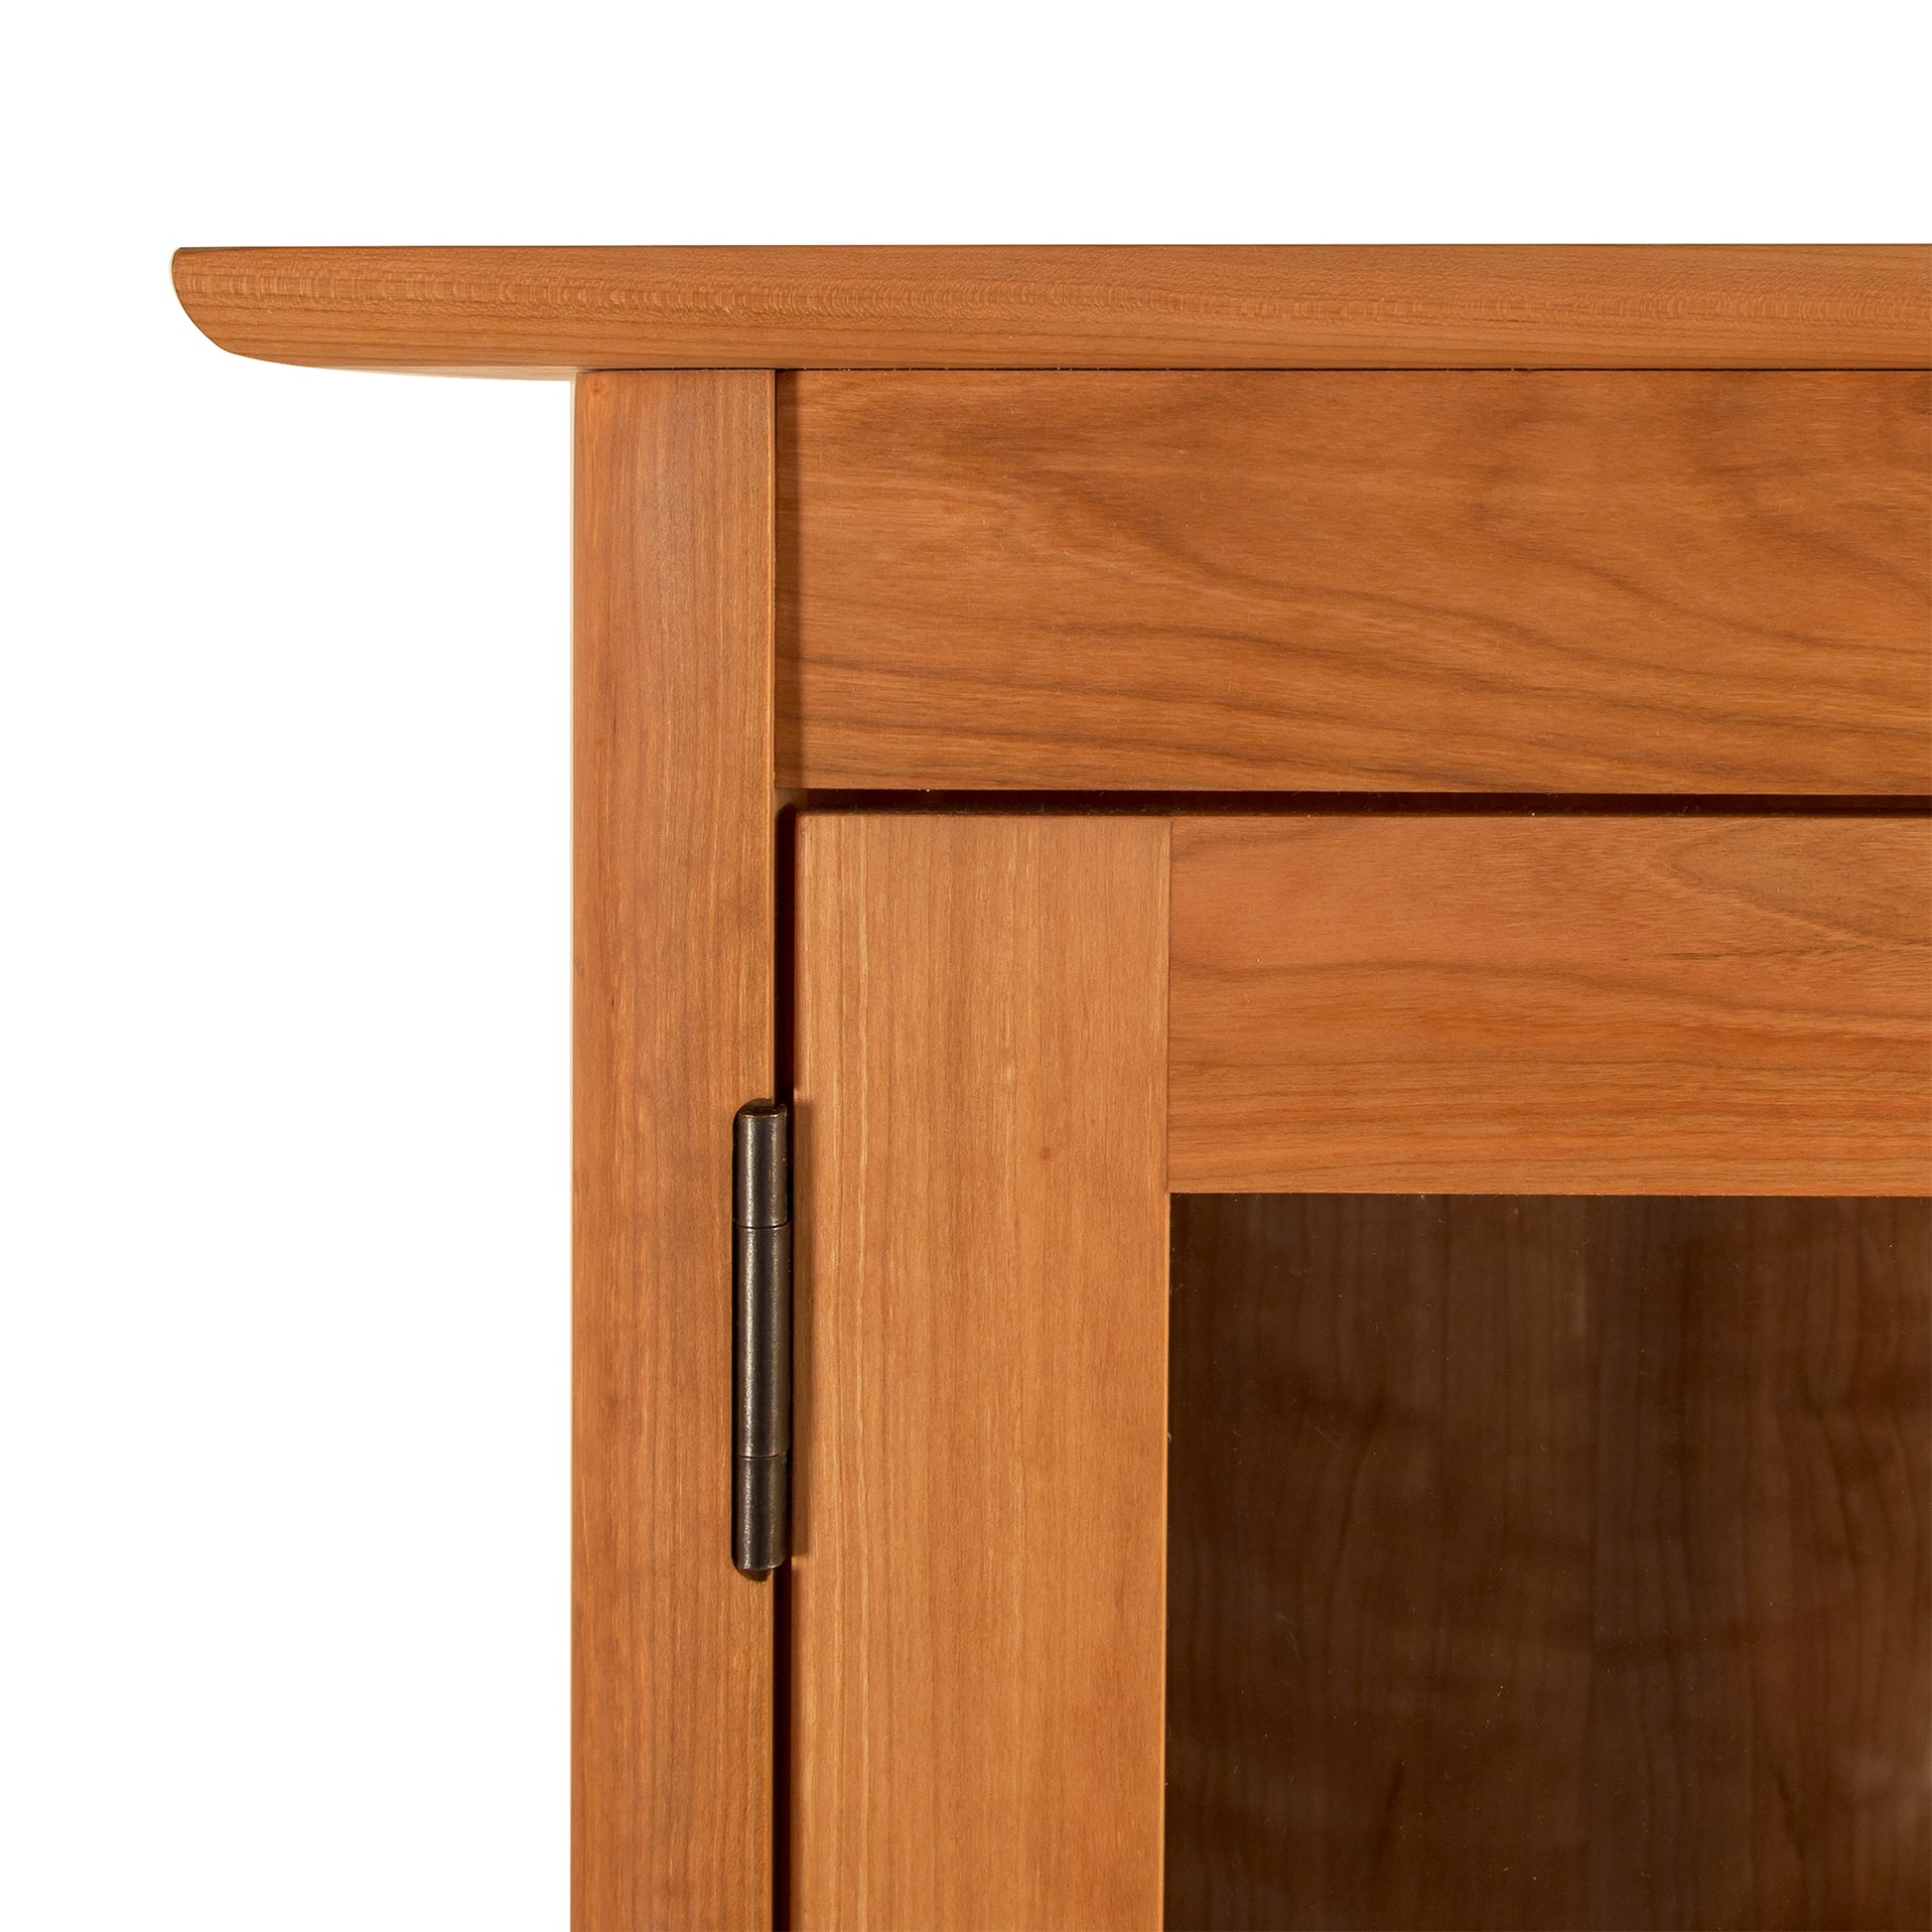 A close-up of a Vermont Furniture Designs Heartwood Shaker 2-Glass Door Bookcase focusing on the corner where there is a drawer with a black handle.